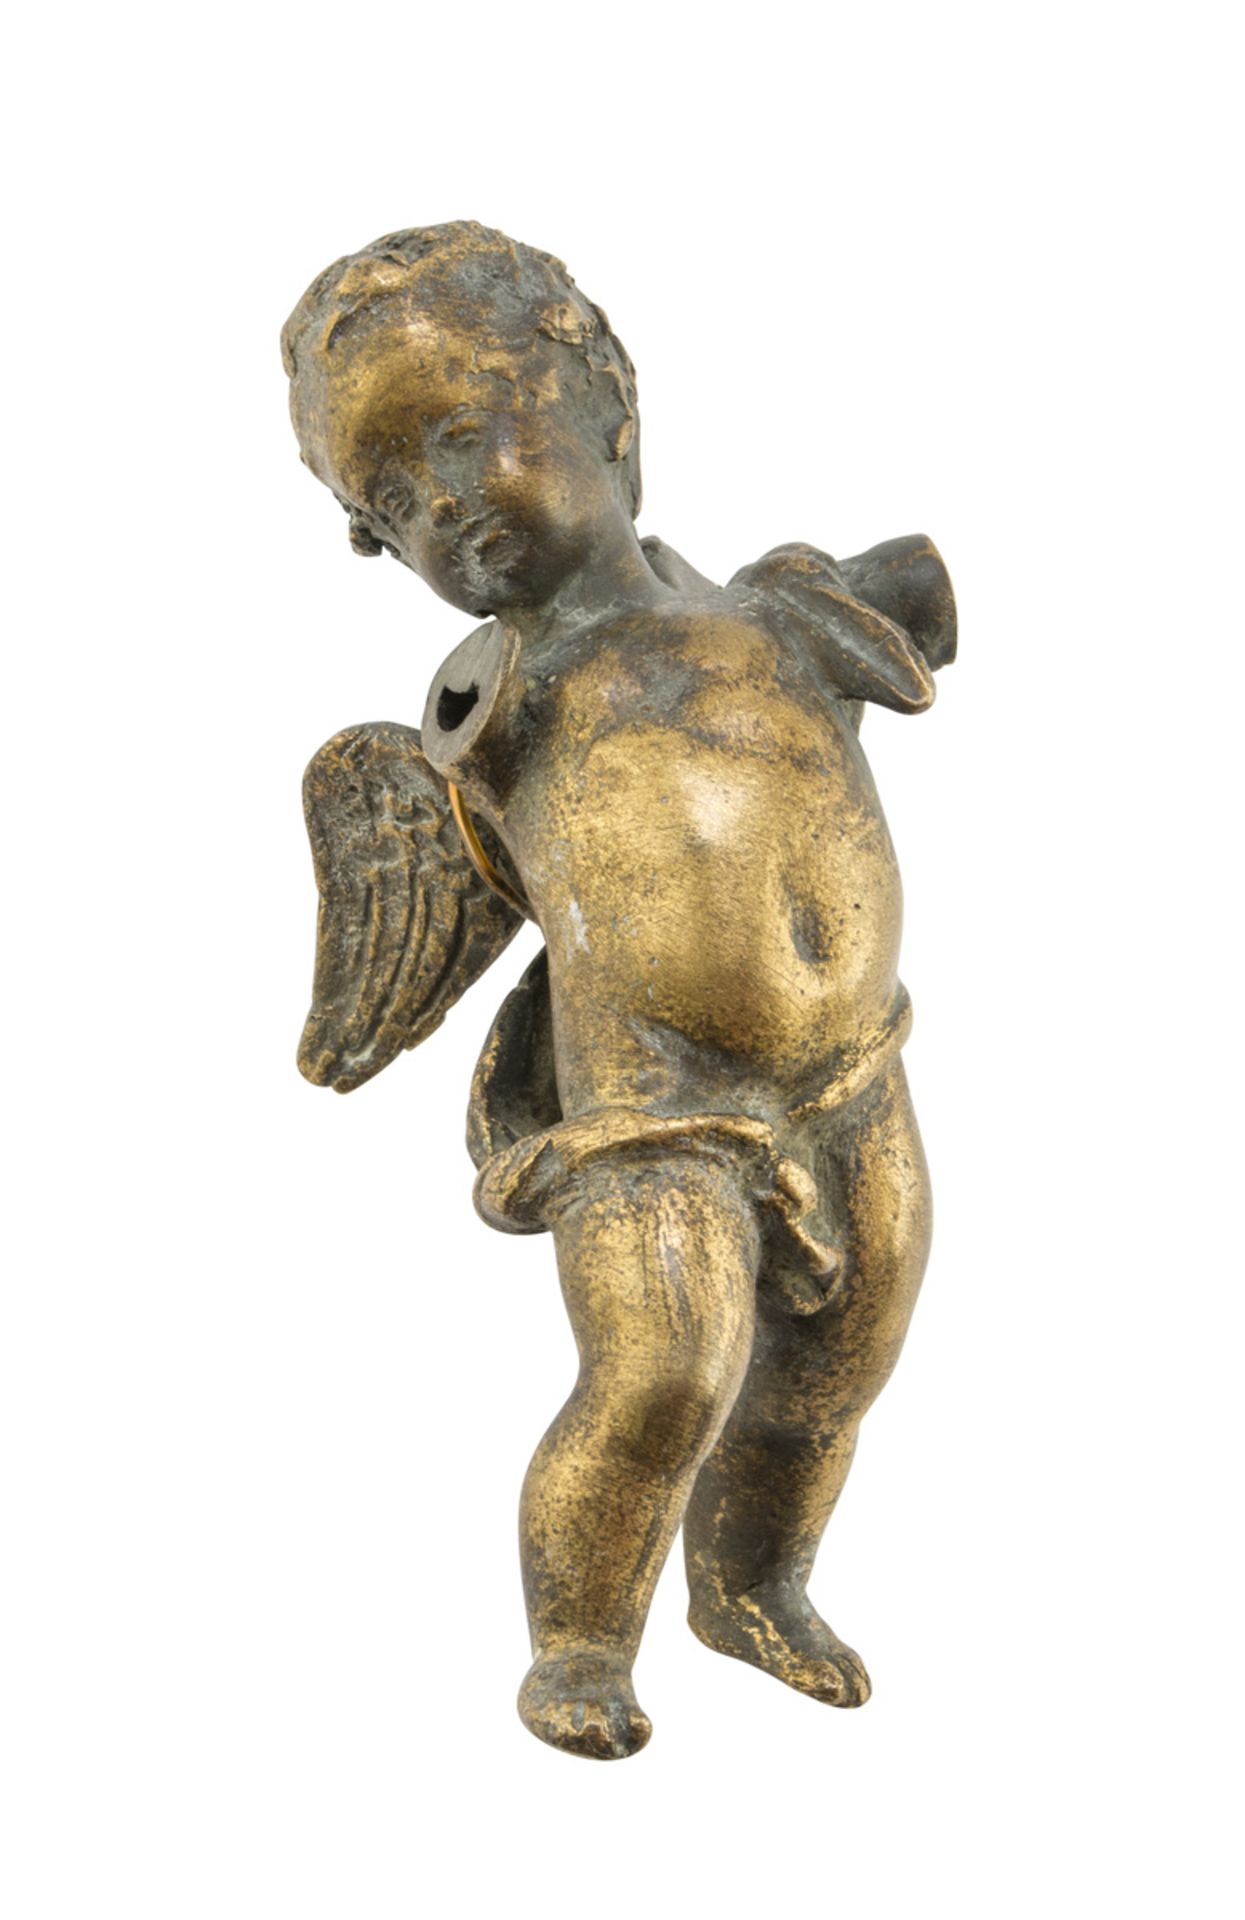 REMAIN OF A PUTTO SCULPTURE IN ORMOLU LATE 16TH CENTURY